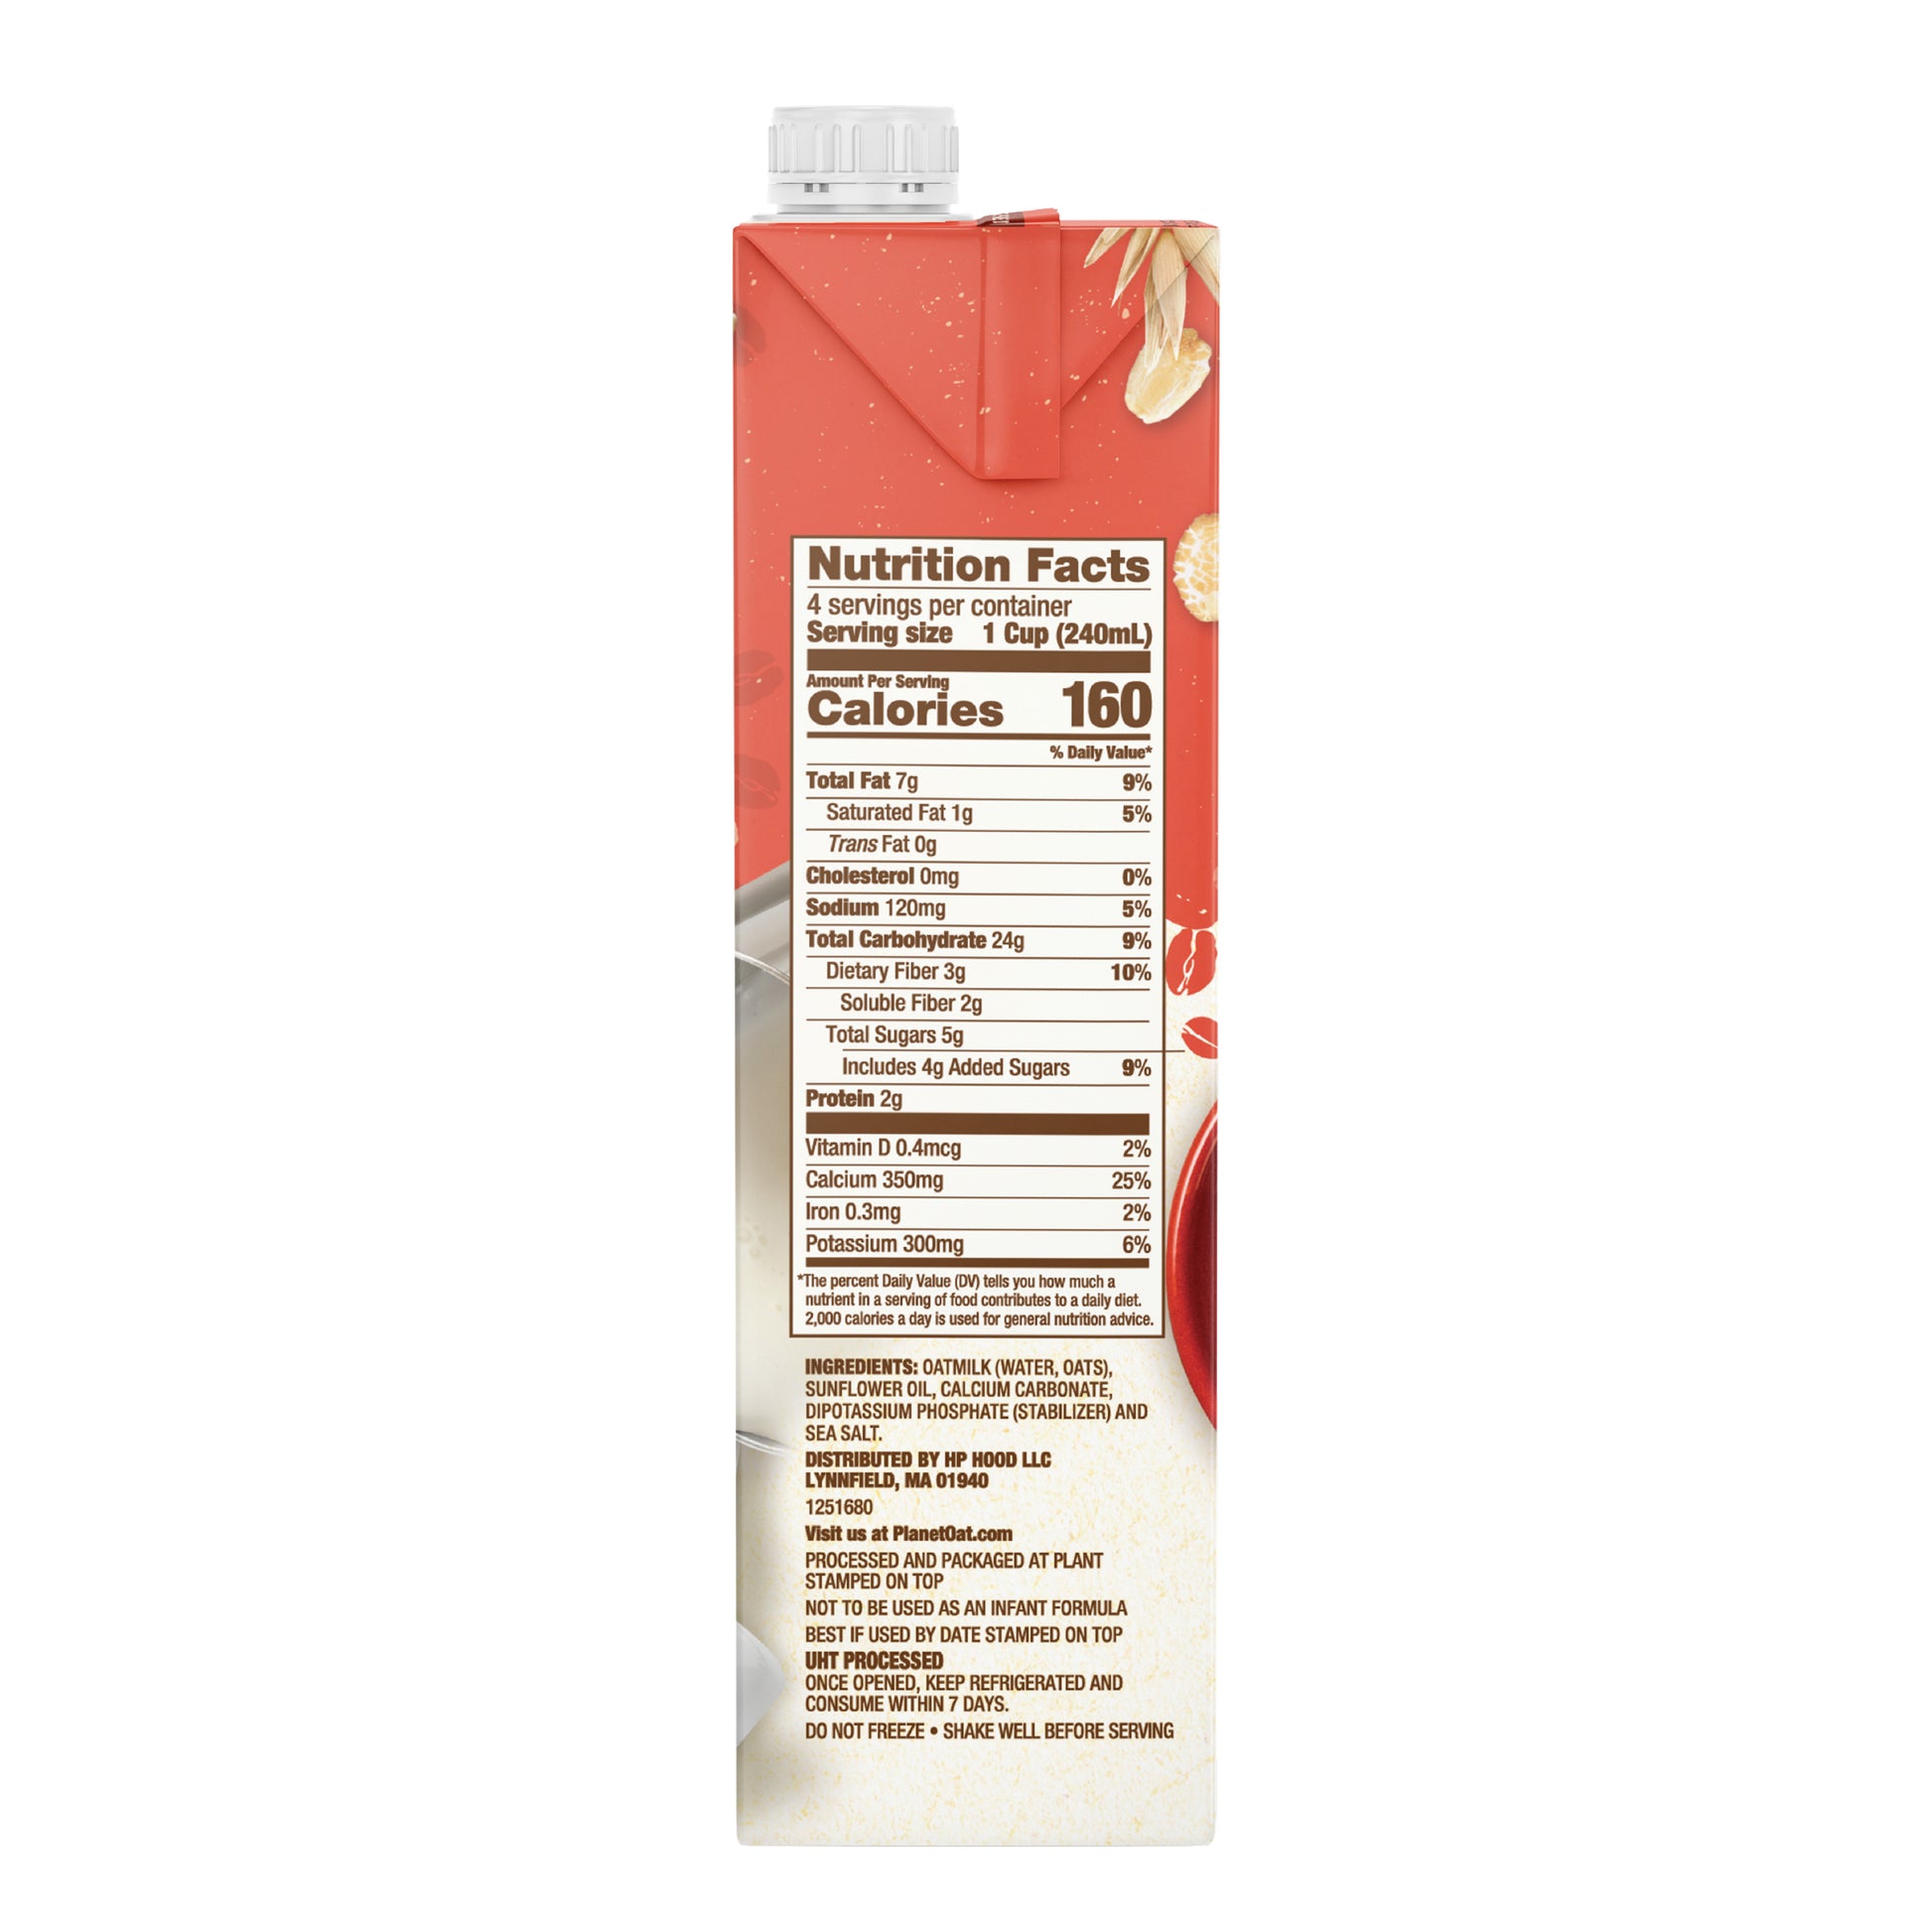 Planet Oat Barista Edition oatmilk  (Product Sample Request - 1 carton) - Cafe Solutions North America